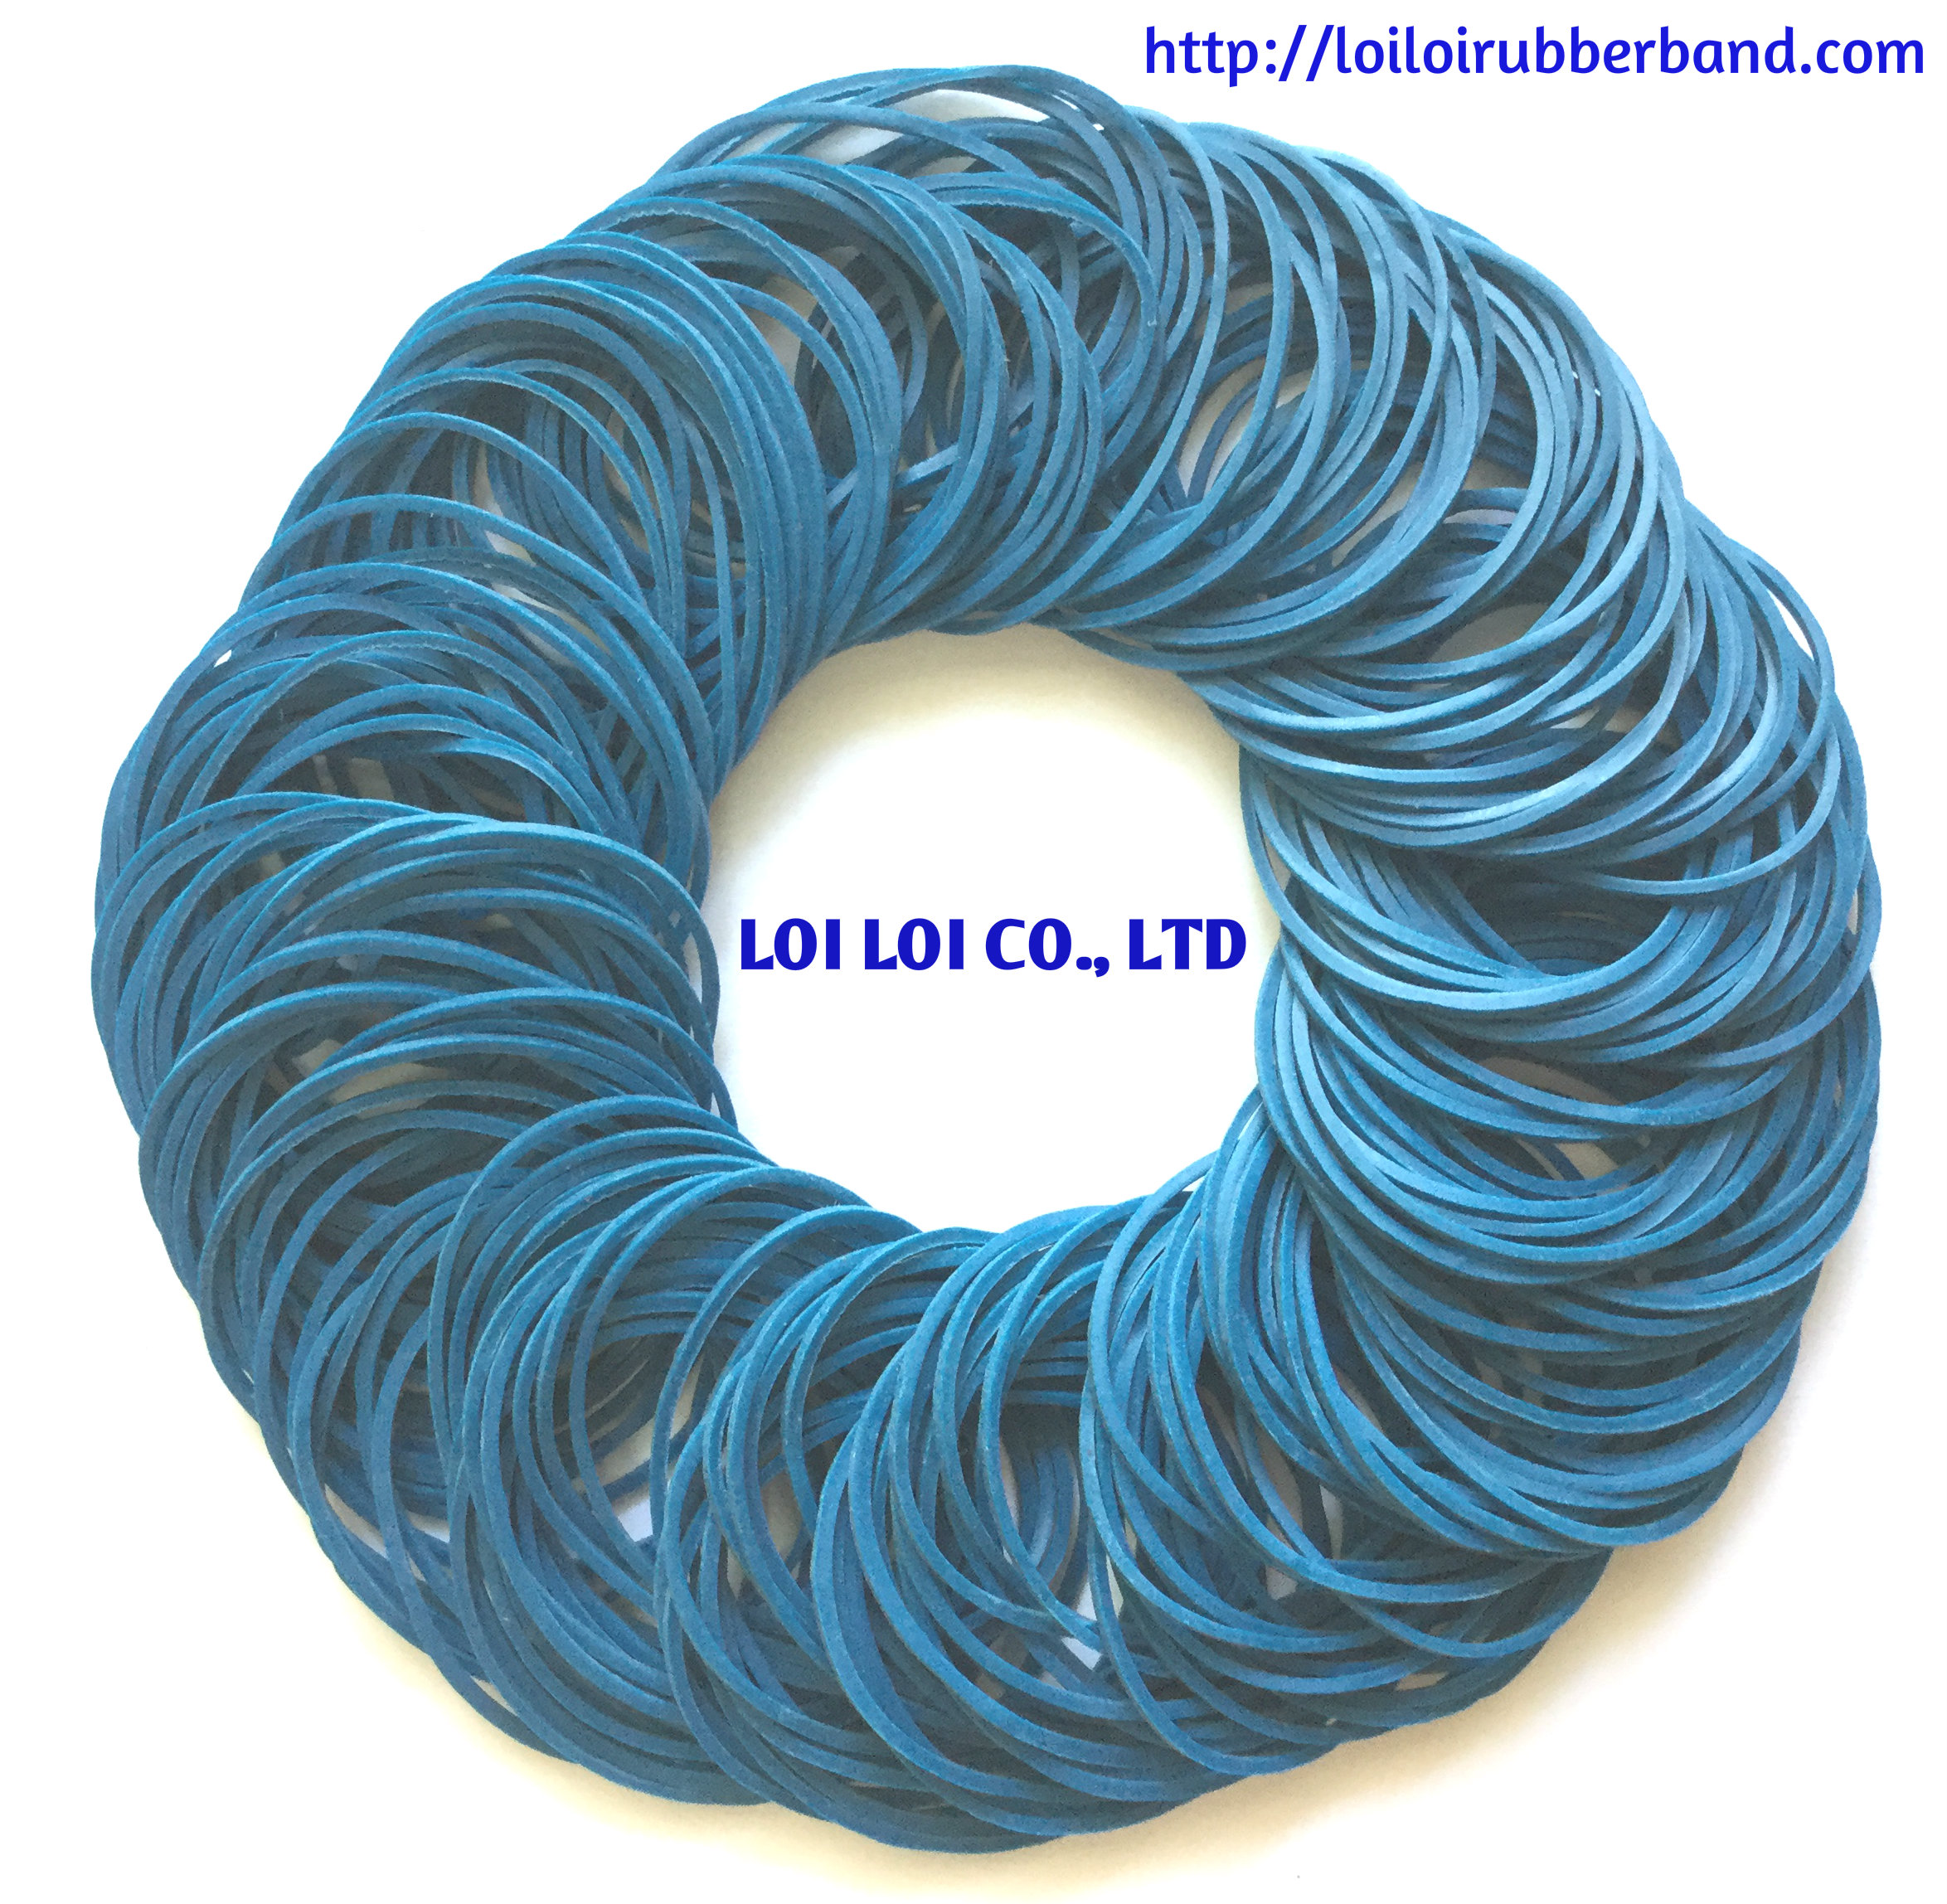 Blue rubber band ecofriendly for daily use